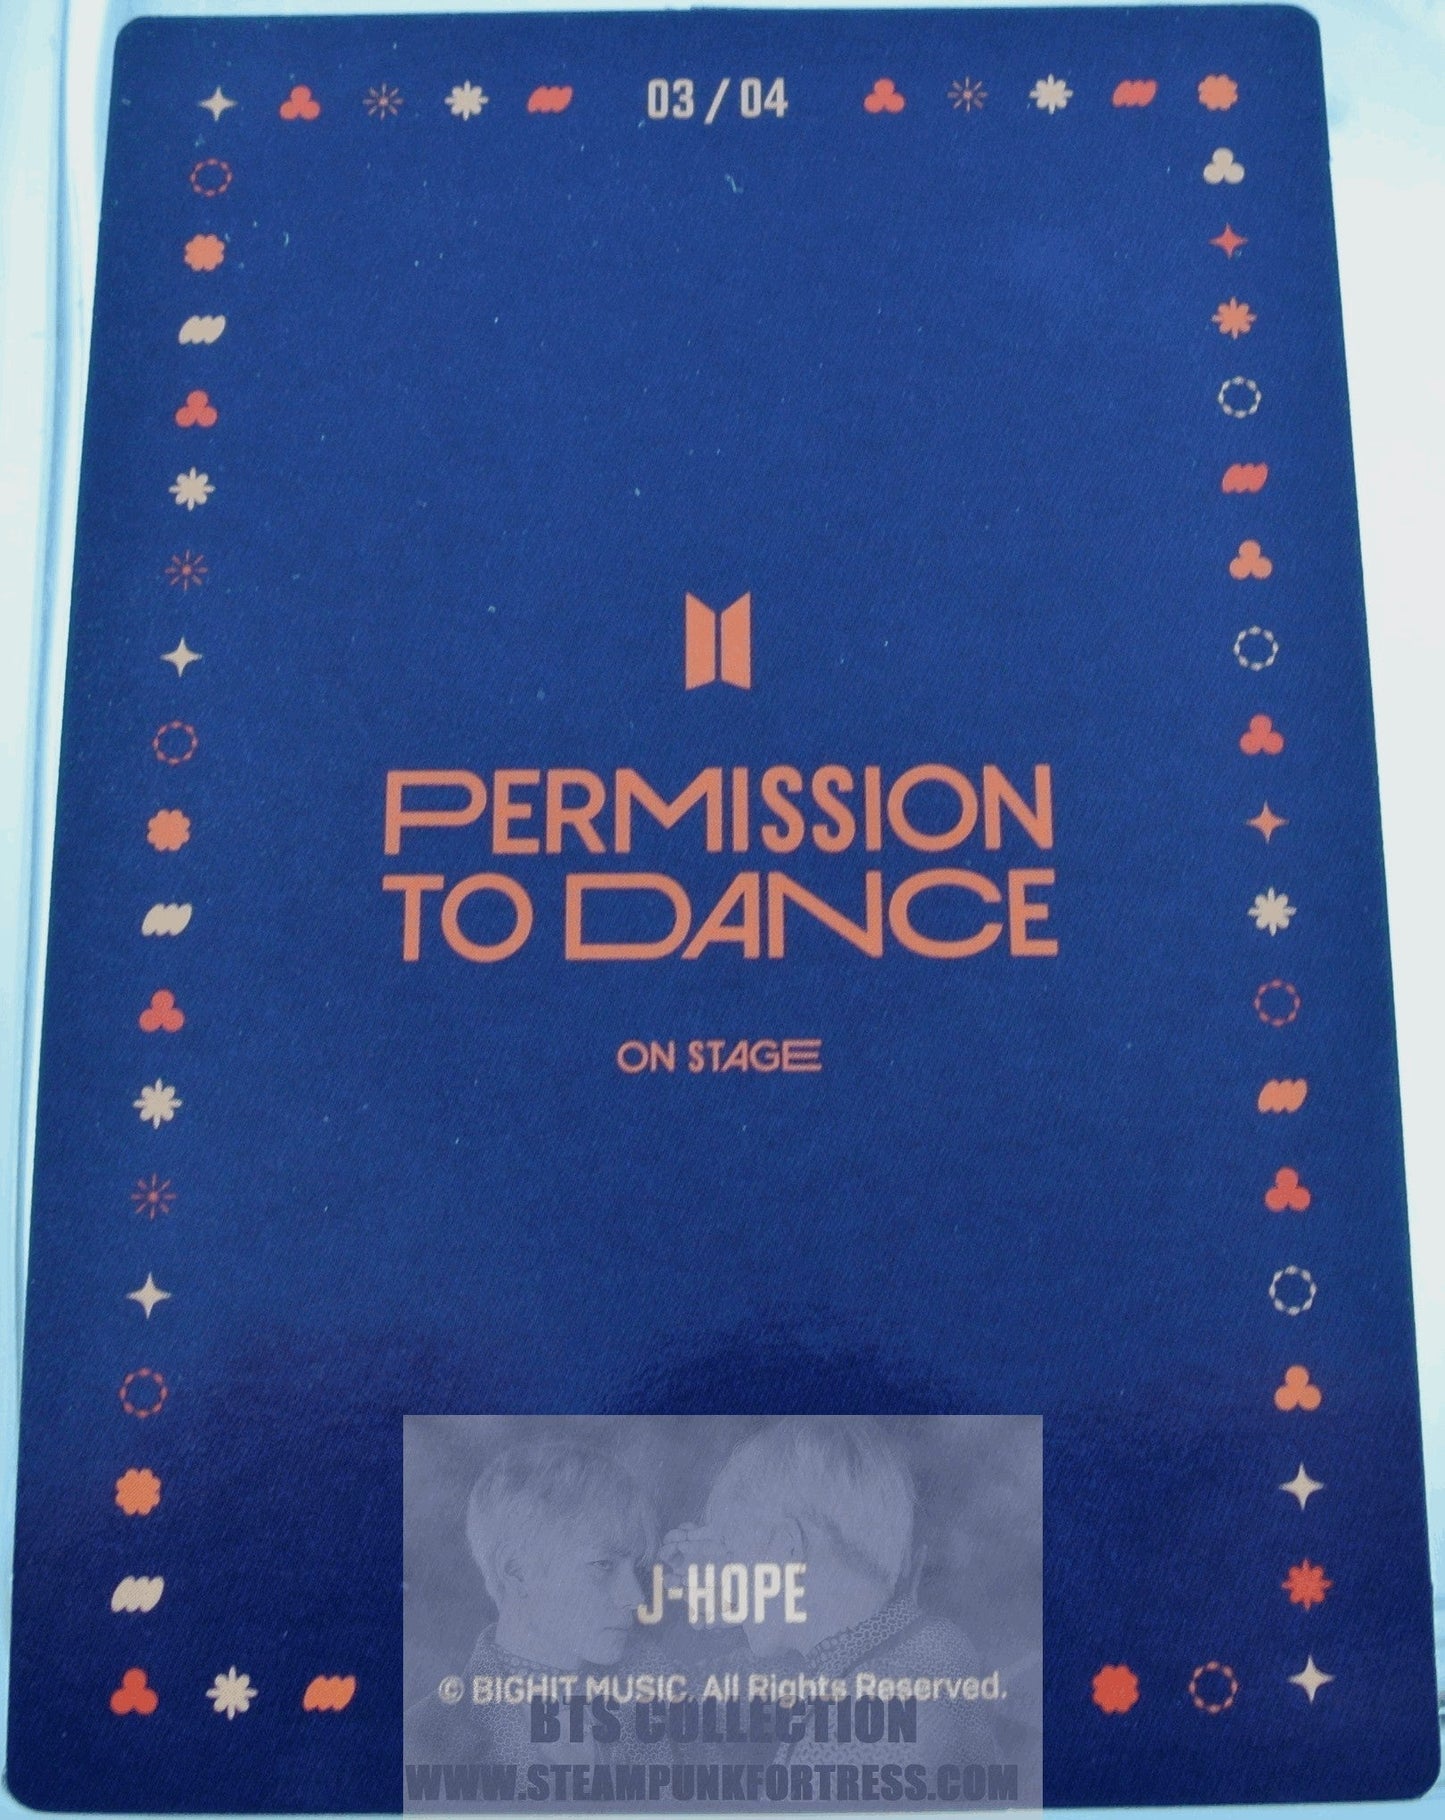 BTS J-HOPE JUNG HOSEOK HO-SEOK JHOPE 2022 PERMISSION TO DANCE ON STAGE SEOUL PTD #3 OF 4 PHOTOCARD PHOTO CARD NEW OFFICIAL MERCHANDISE